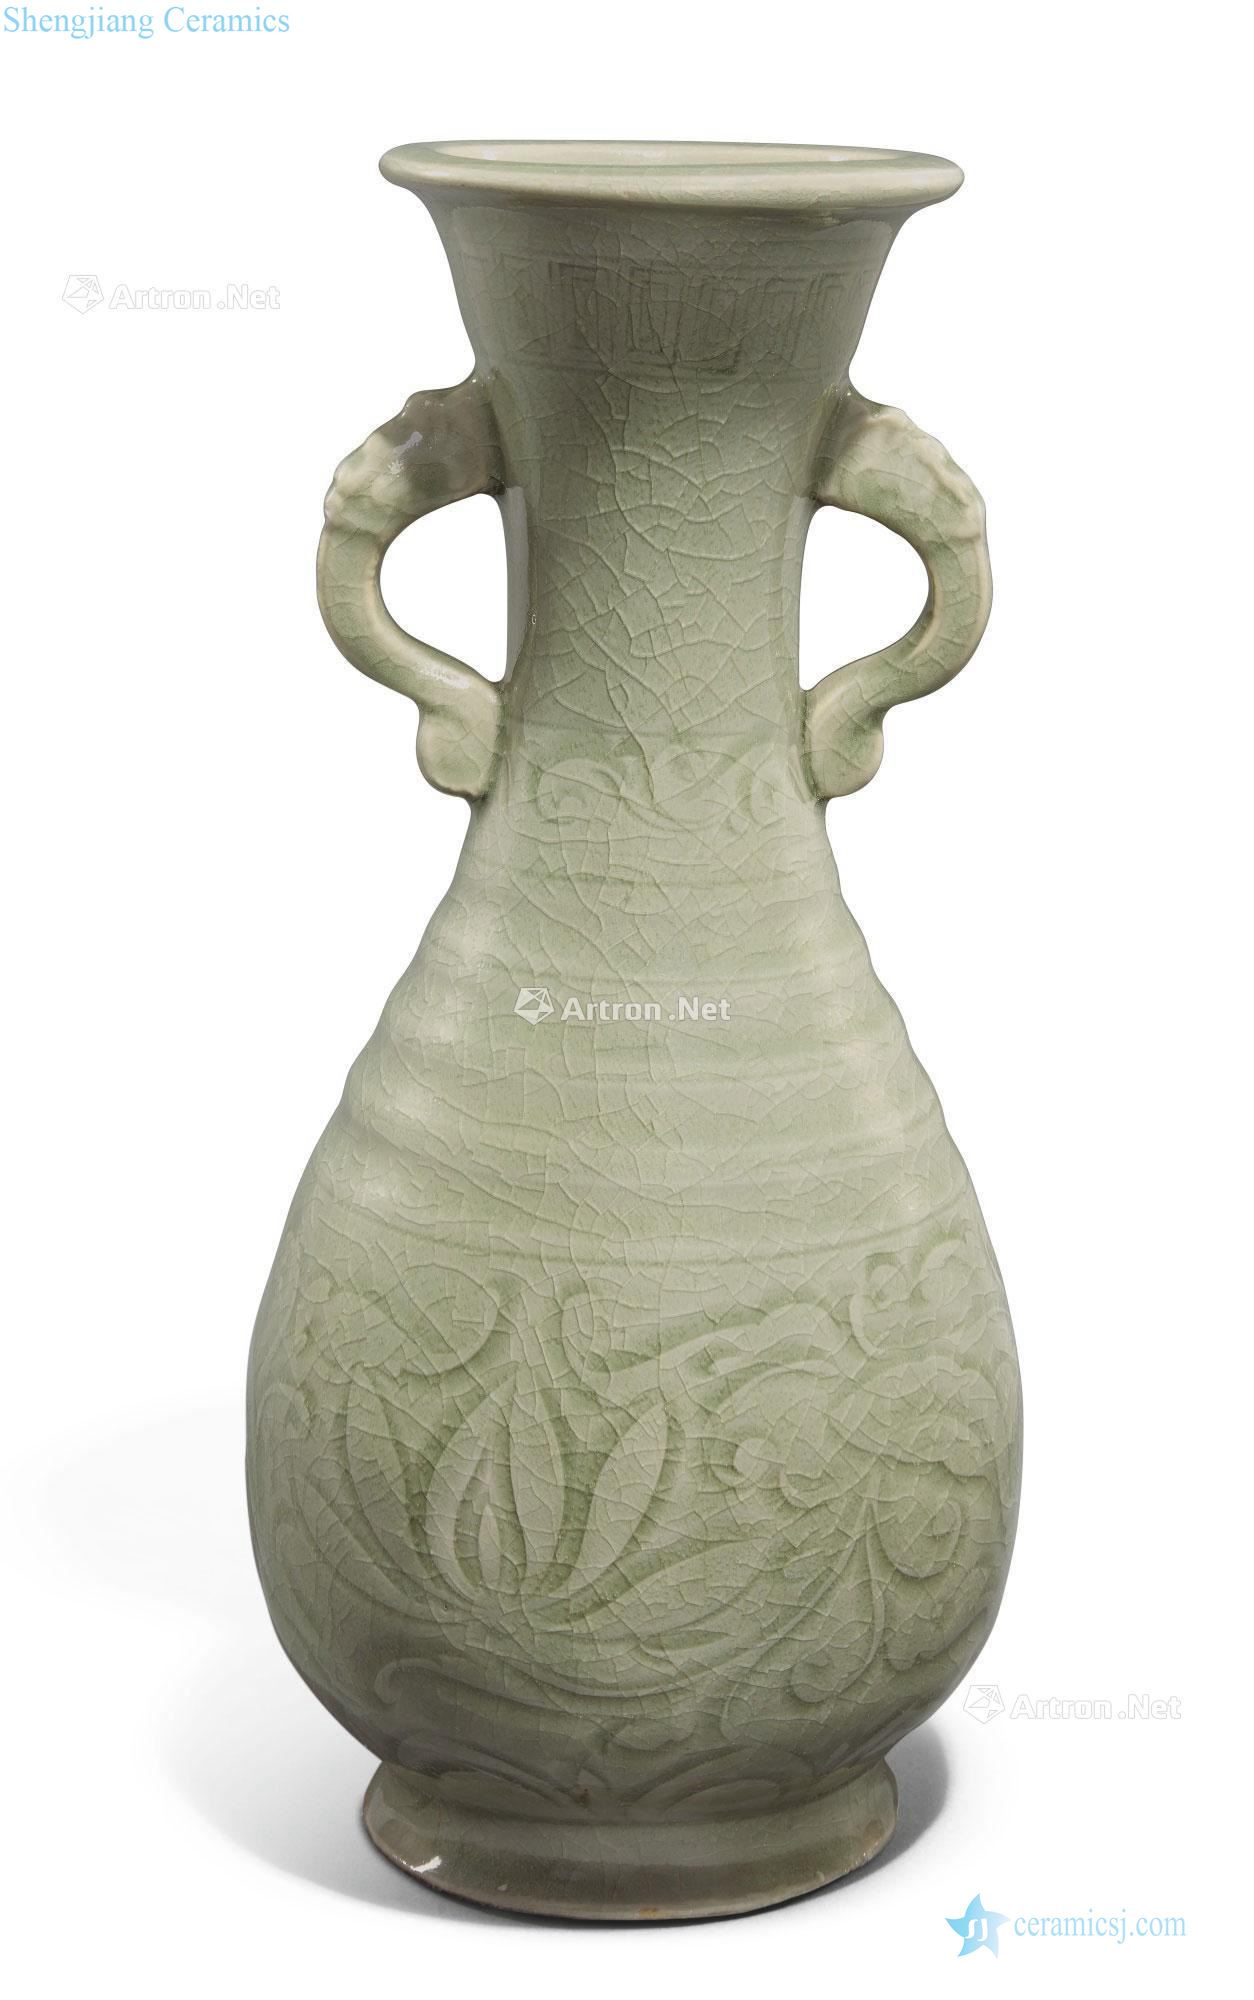 The song dynasty Yao state kiln green glaze lotus grain ssangyong's ear the flask